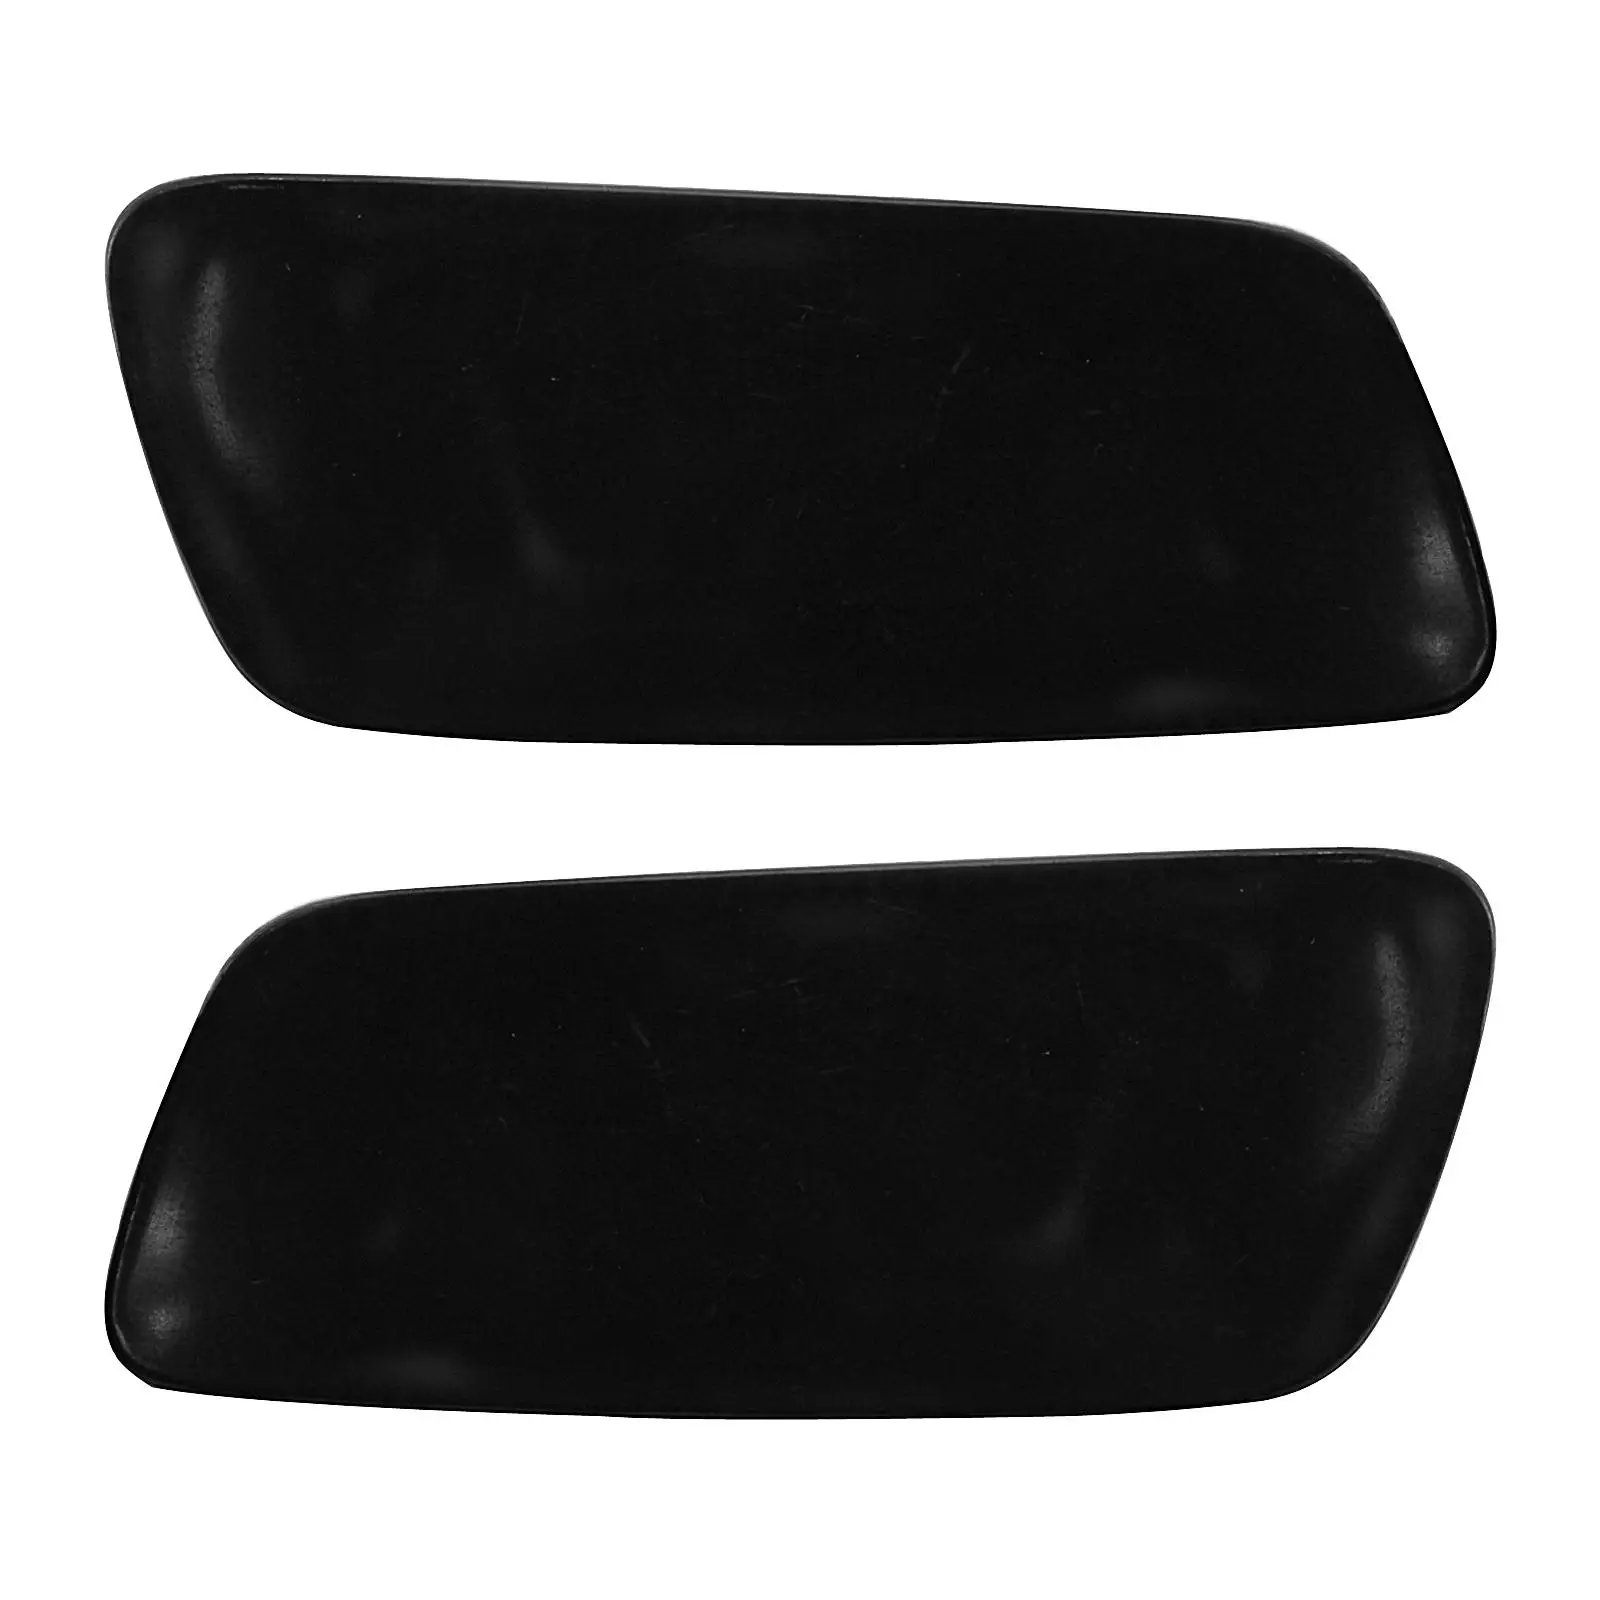 2Pcs 39839842 Accessories 191275531297 398398305 Exterior Parts Front Headlight Washer  39839830 for  